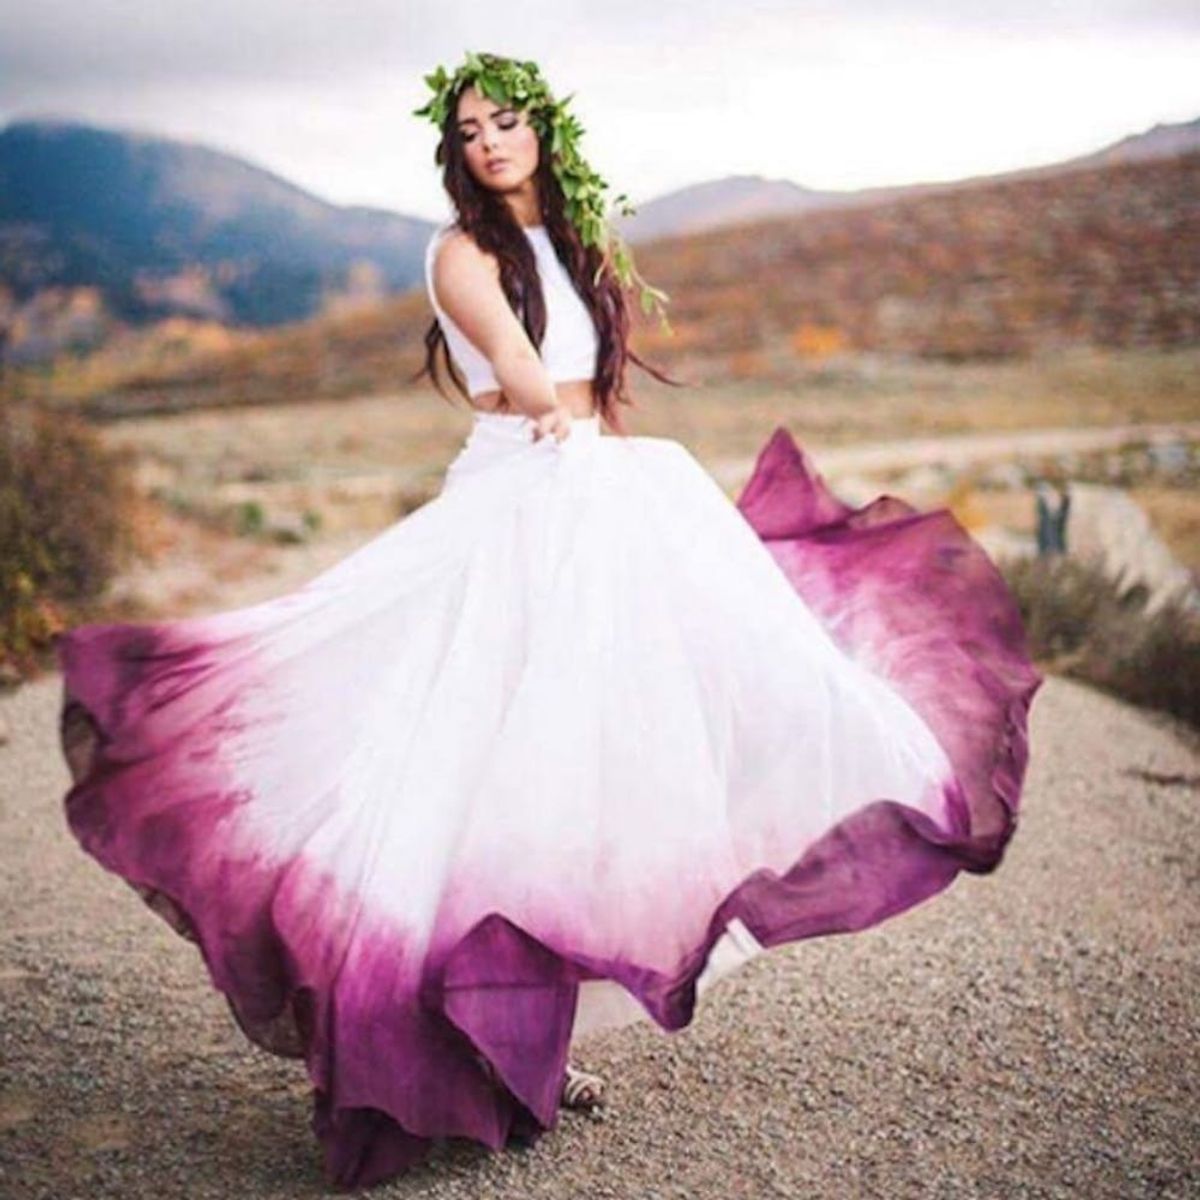 The 12 Biggest Trends in Bridal Style to Hit Weddings in 2016 That We Still Kinda Love